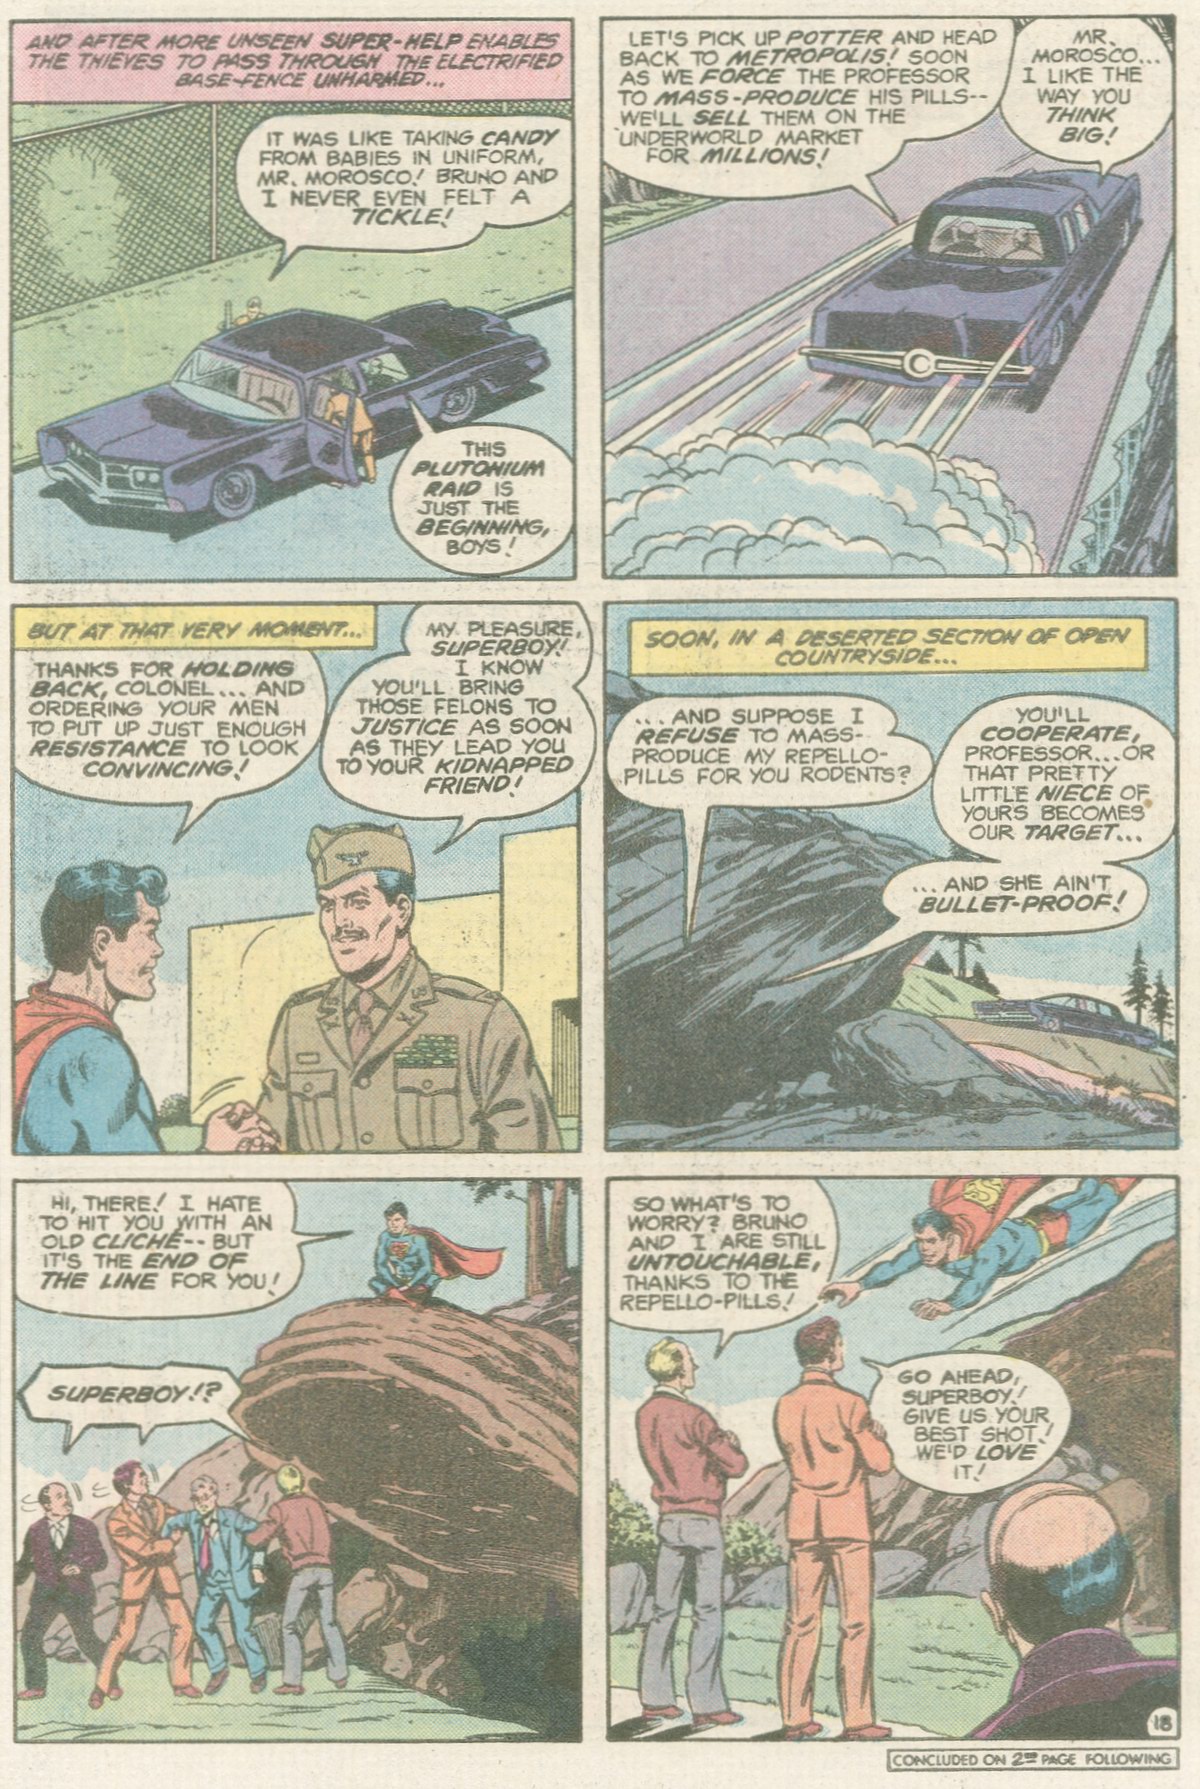 The New Adventures of Superboy 26 Page 18